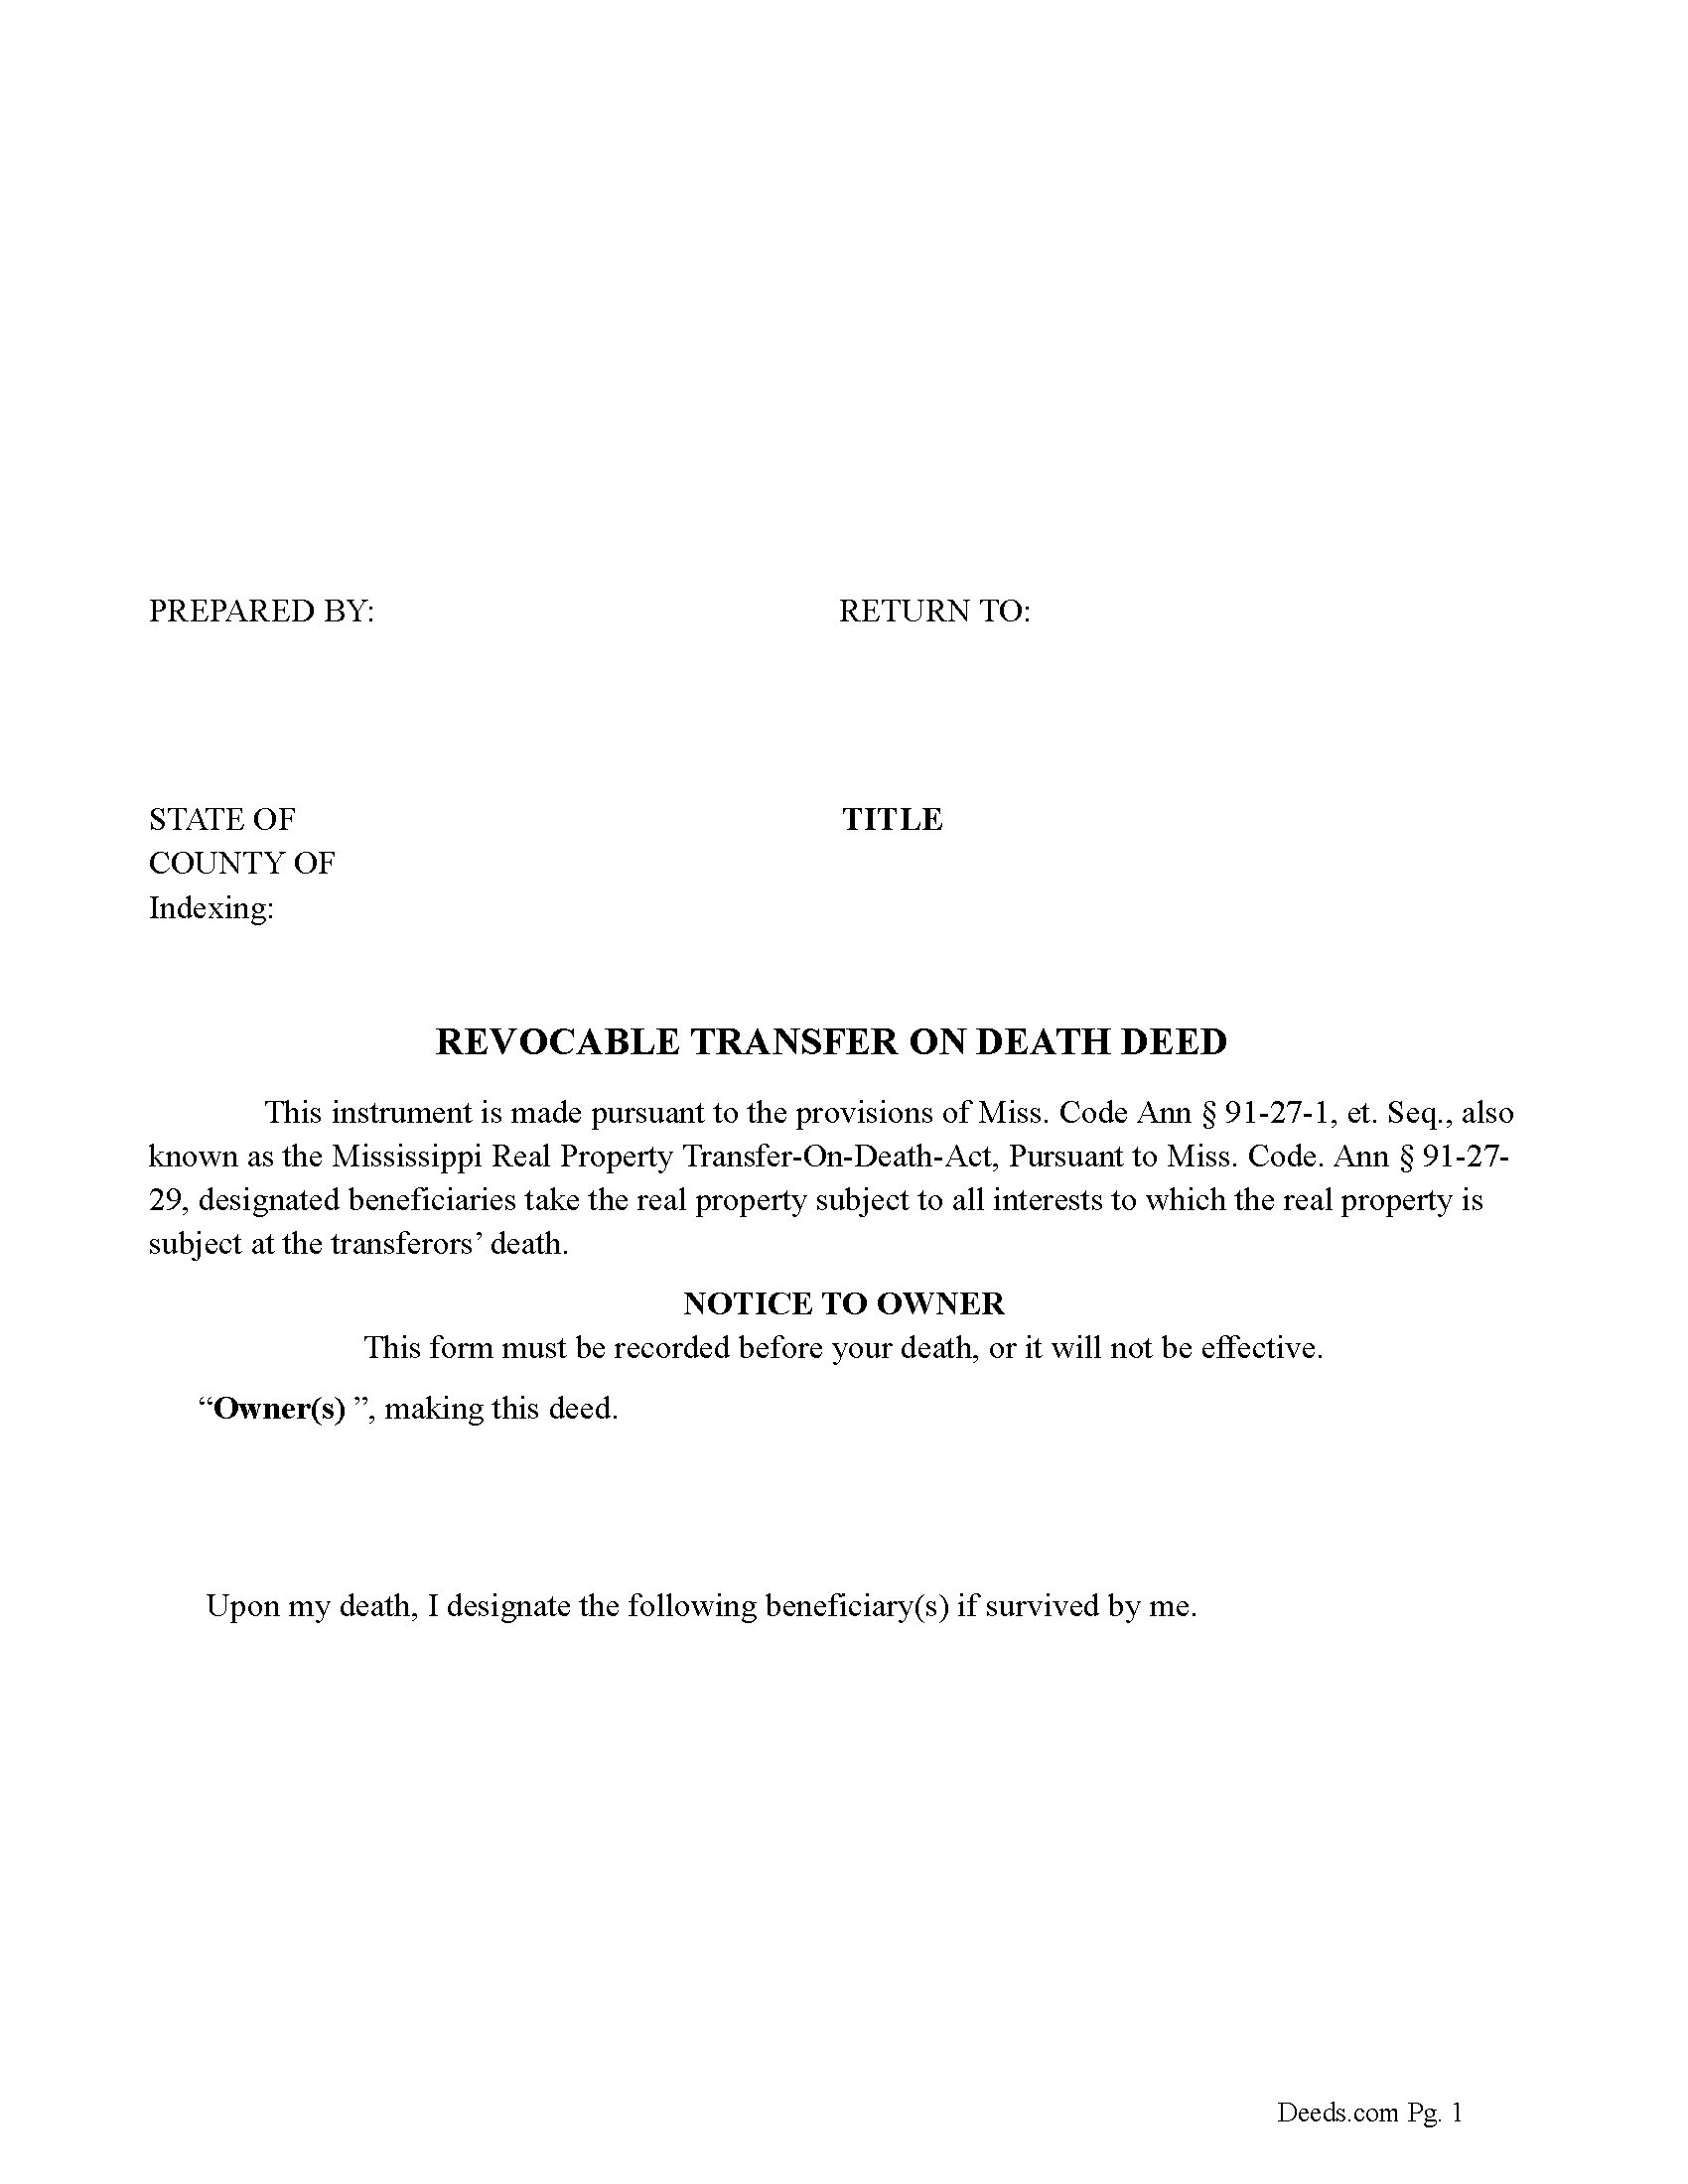 Revocable Transfer on Death Deed